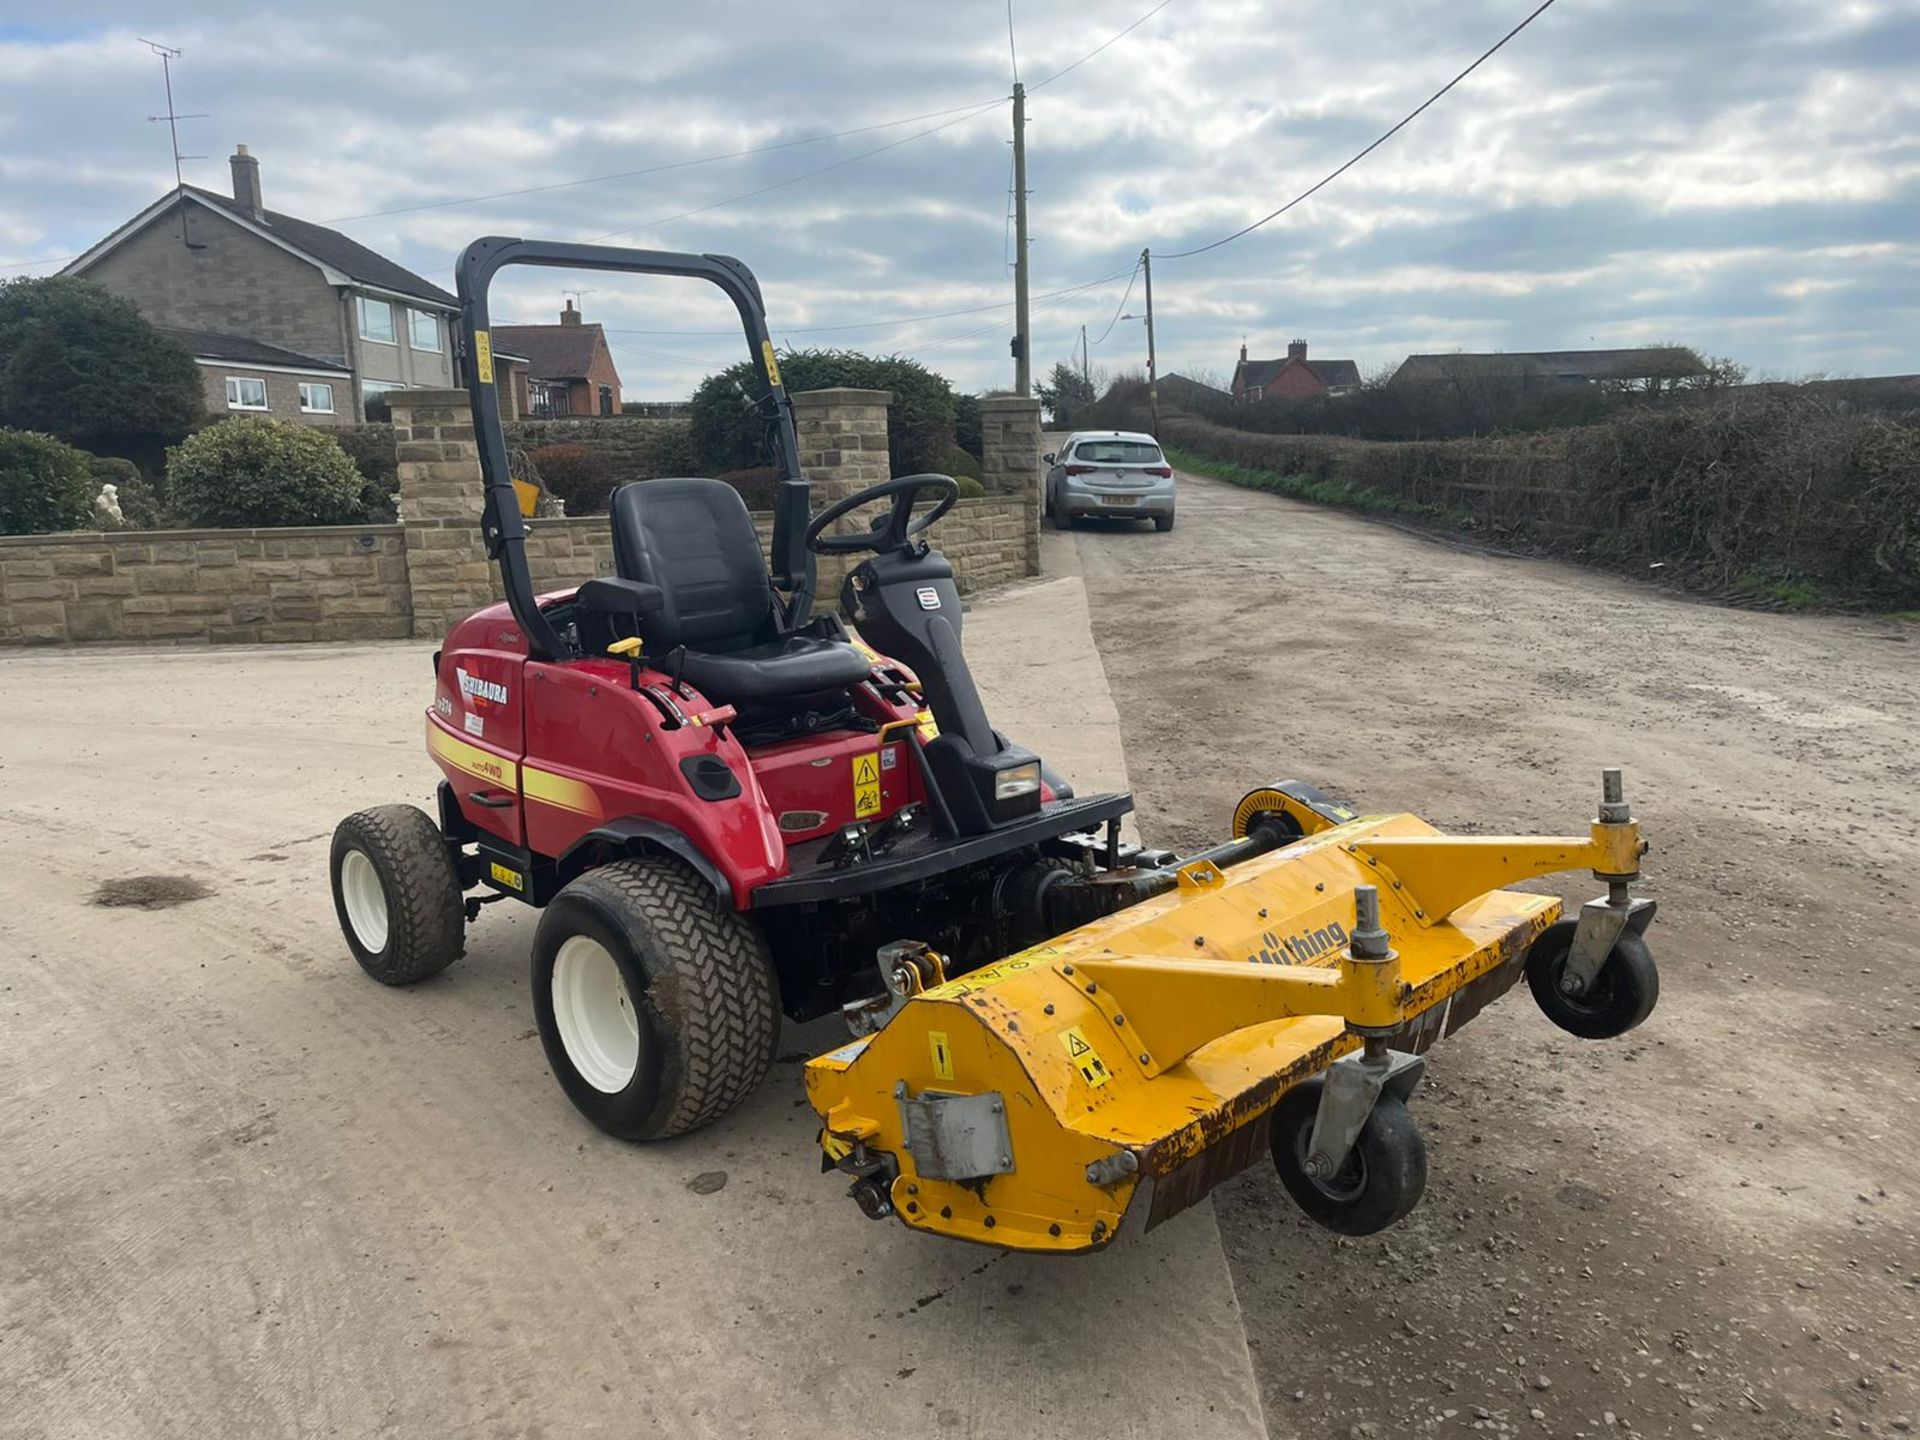 2014 SHIBAURA CM374 RIDE ON MOWER WITH A 2014 MUTHING FLAIL DECK, RUNS DRIVES AND CUTS *PLUS VAT* - Image 4 of 10